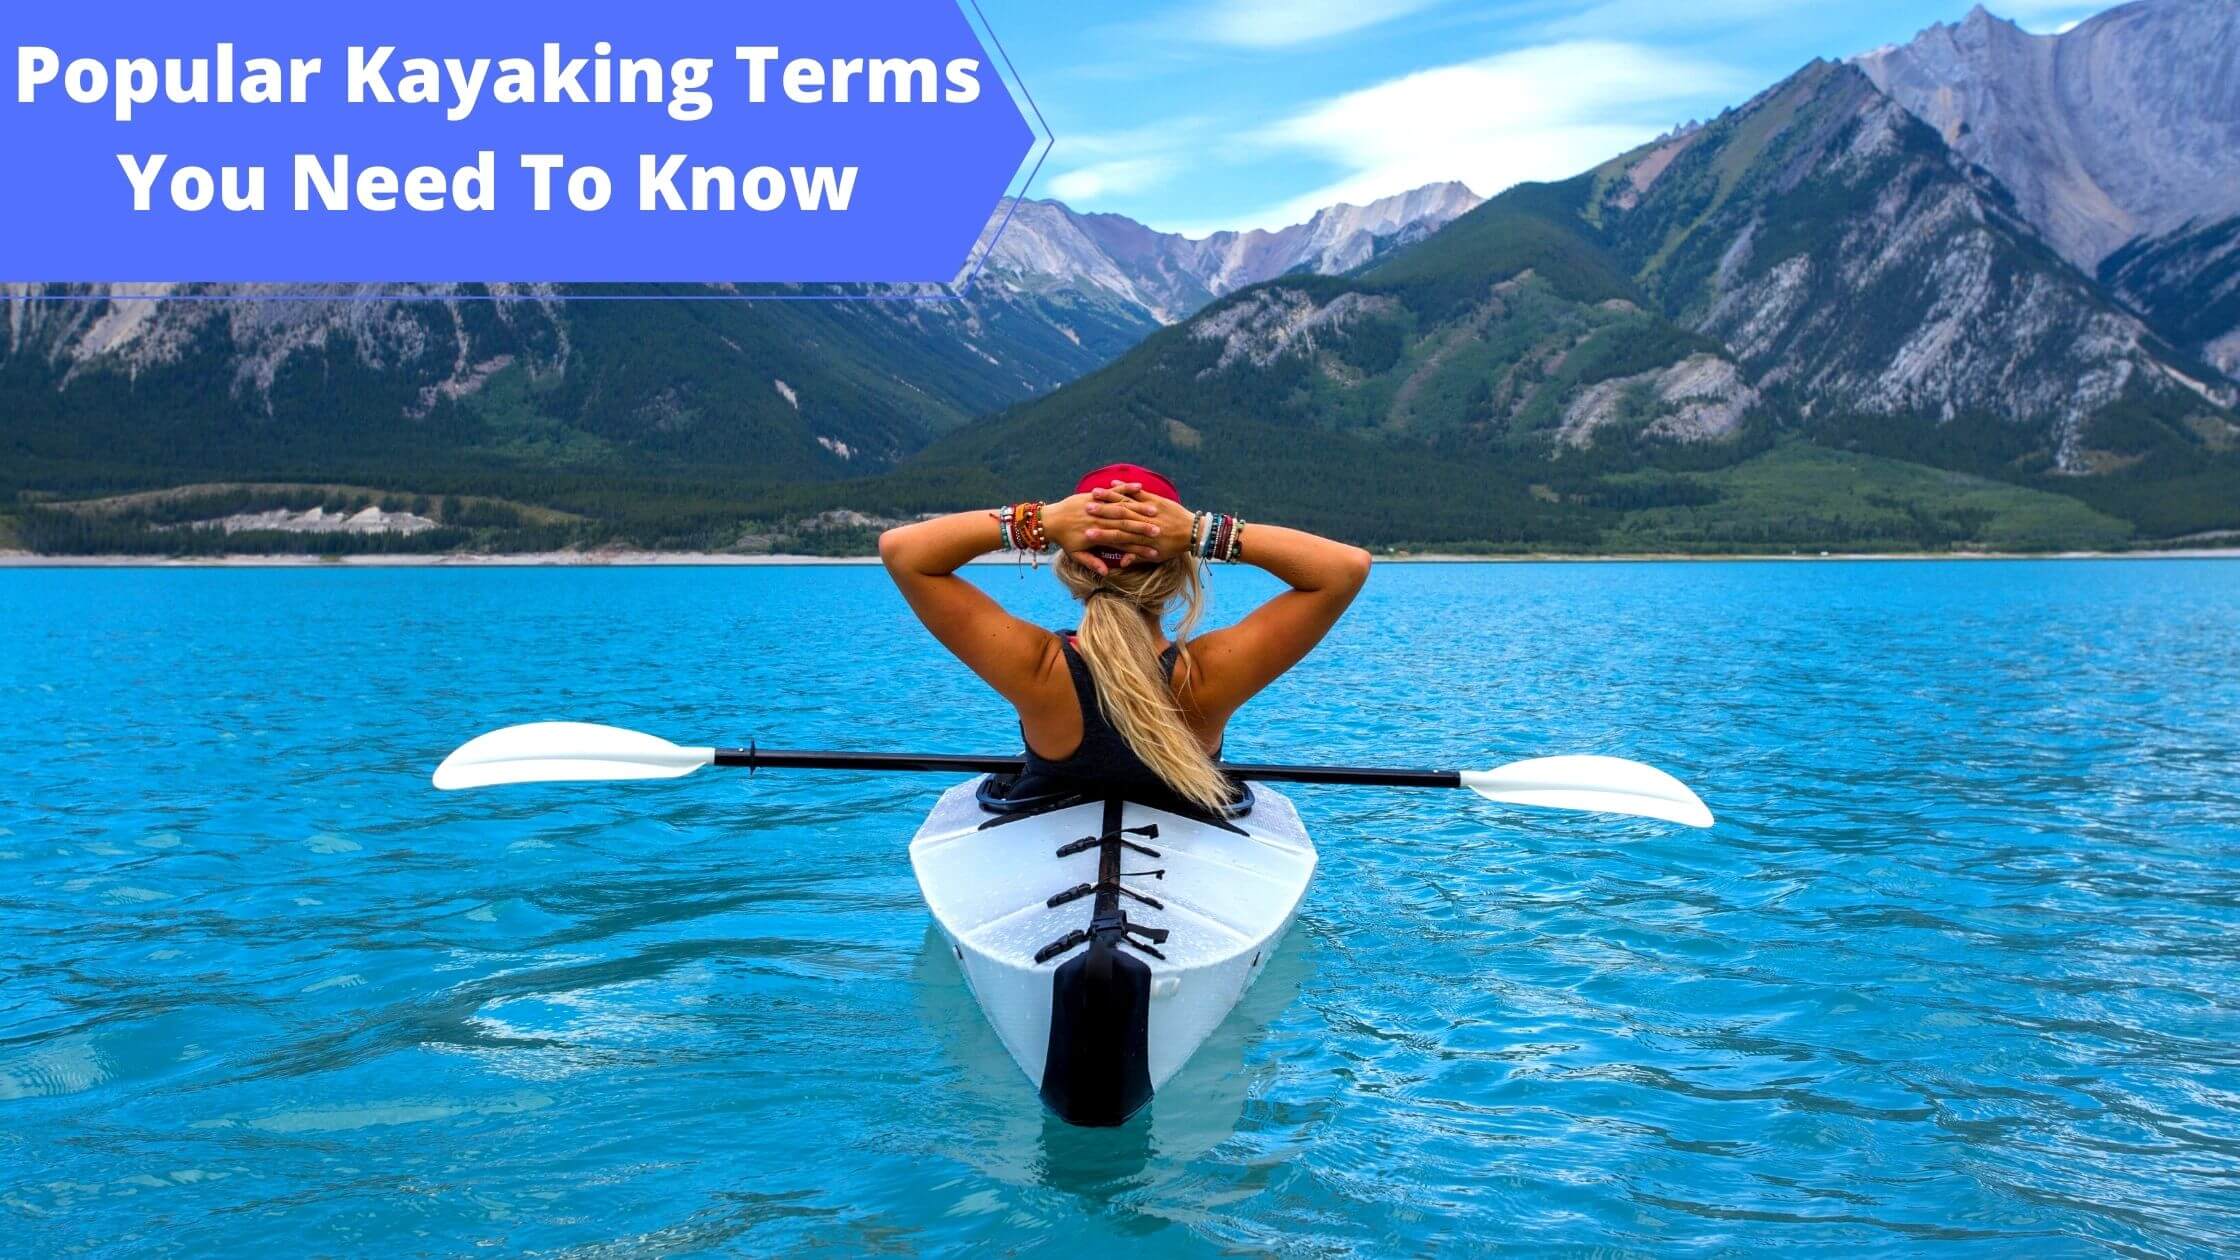 Popular Standard Technical Kayaking Terms - Terminology & Definitions